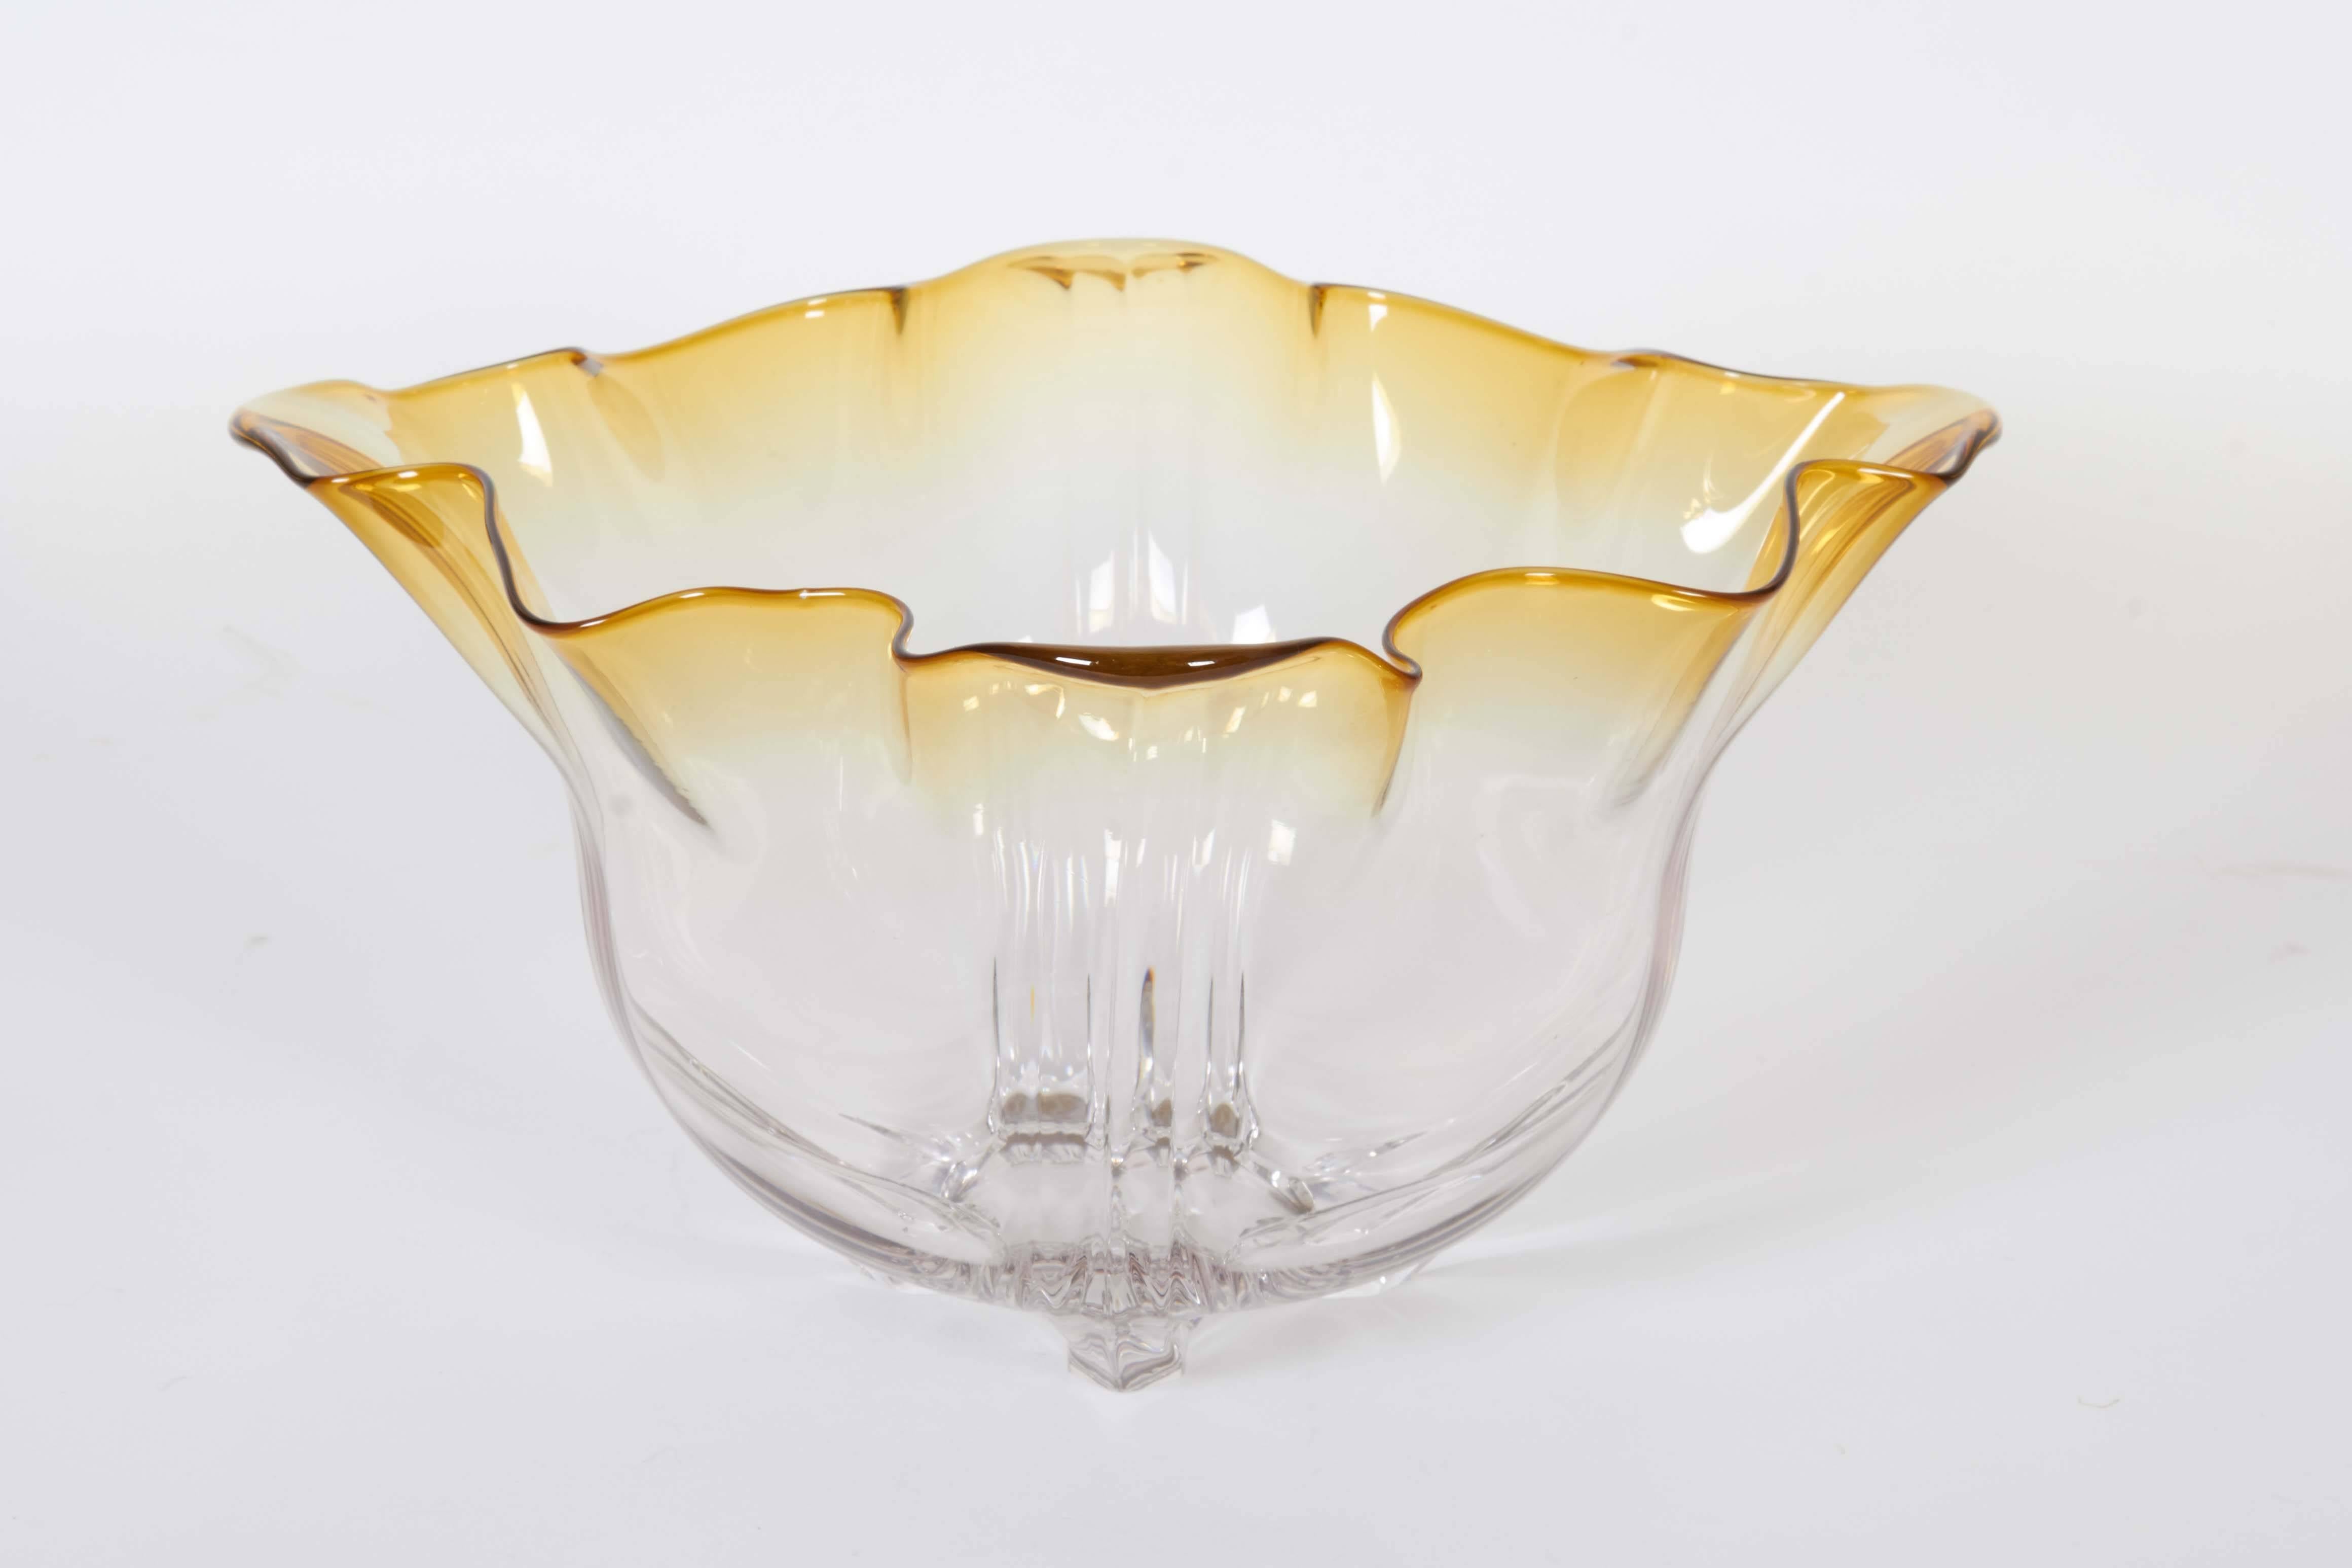 A rare decorative bowl from Frederick Carder's 'Grotesque' line for Steuben, model #7277 produced within the early 20th century era, glass colored amber to clear, highly organic lobed body with flared and ruffled rim. Very good vintage condition,